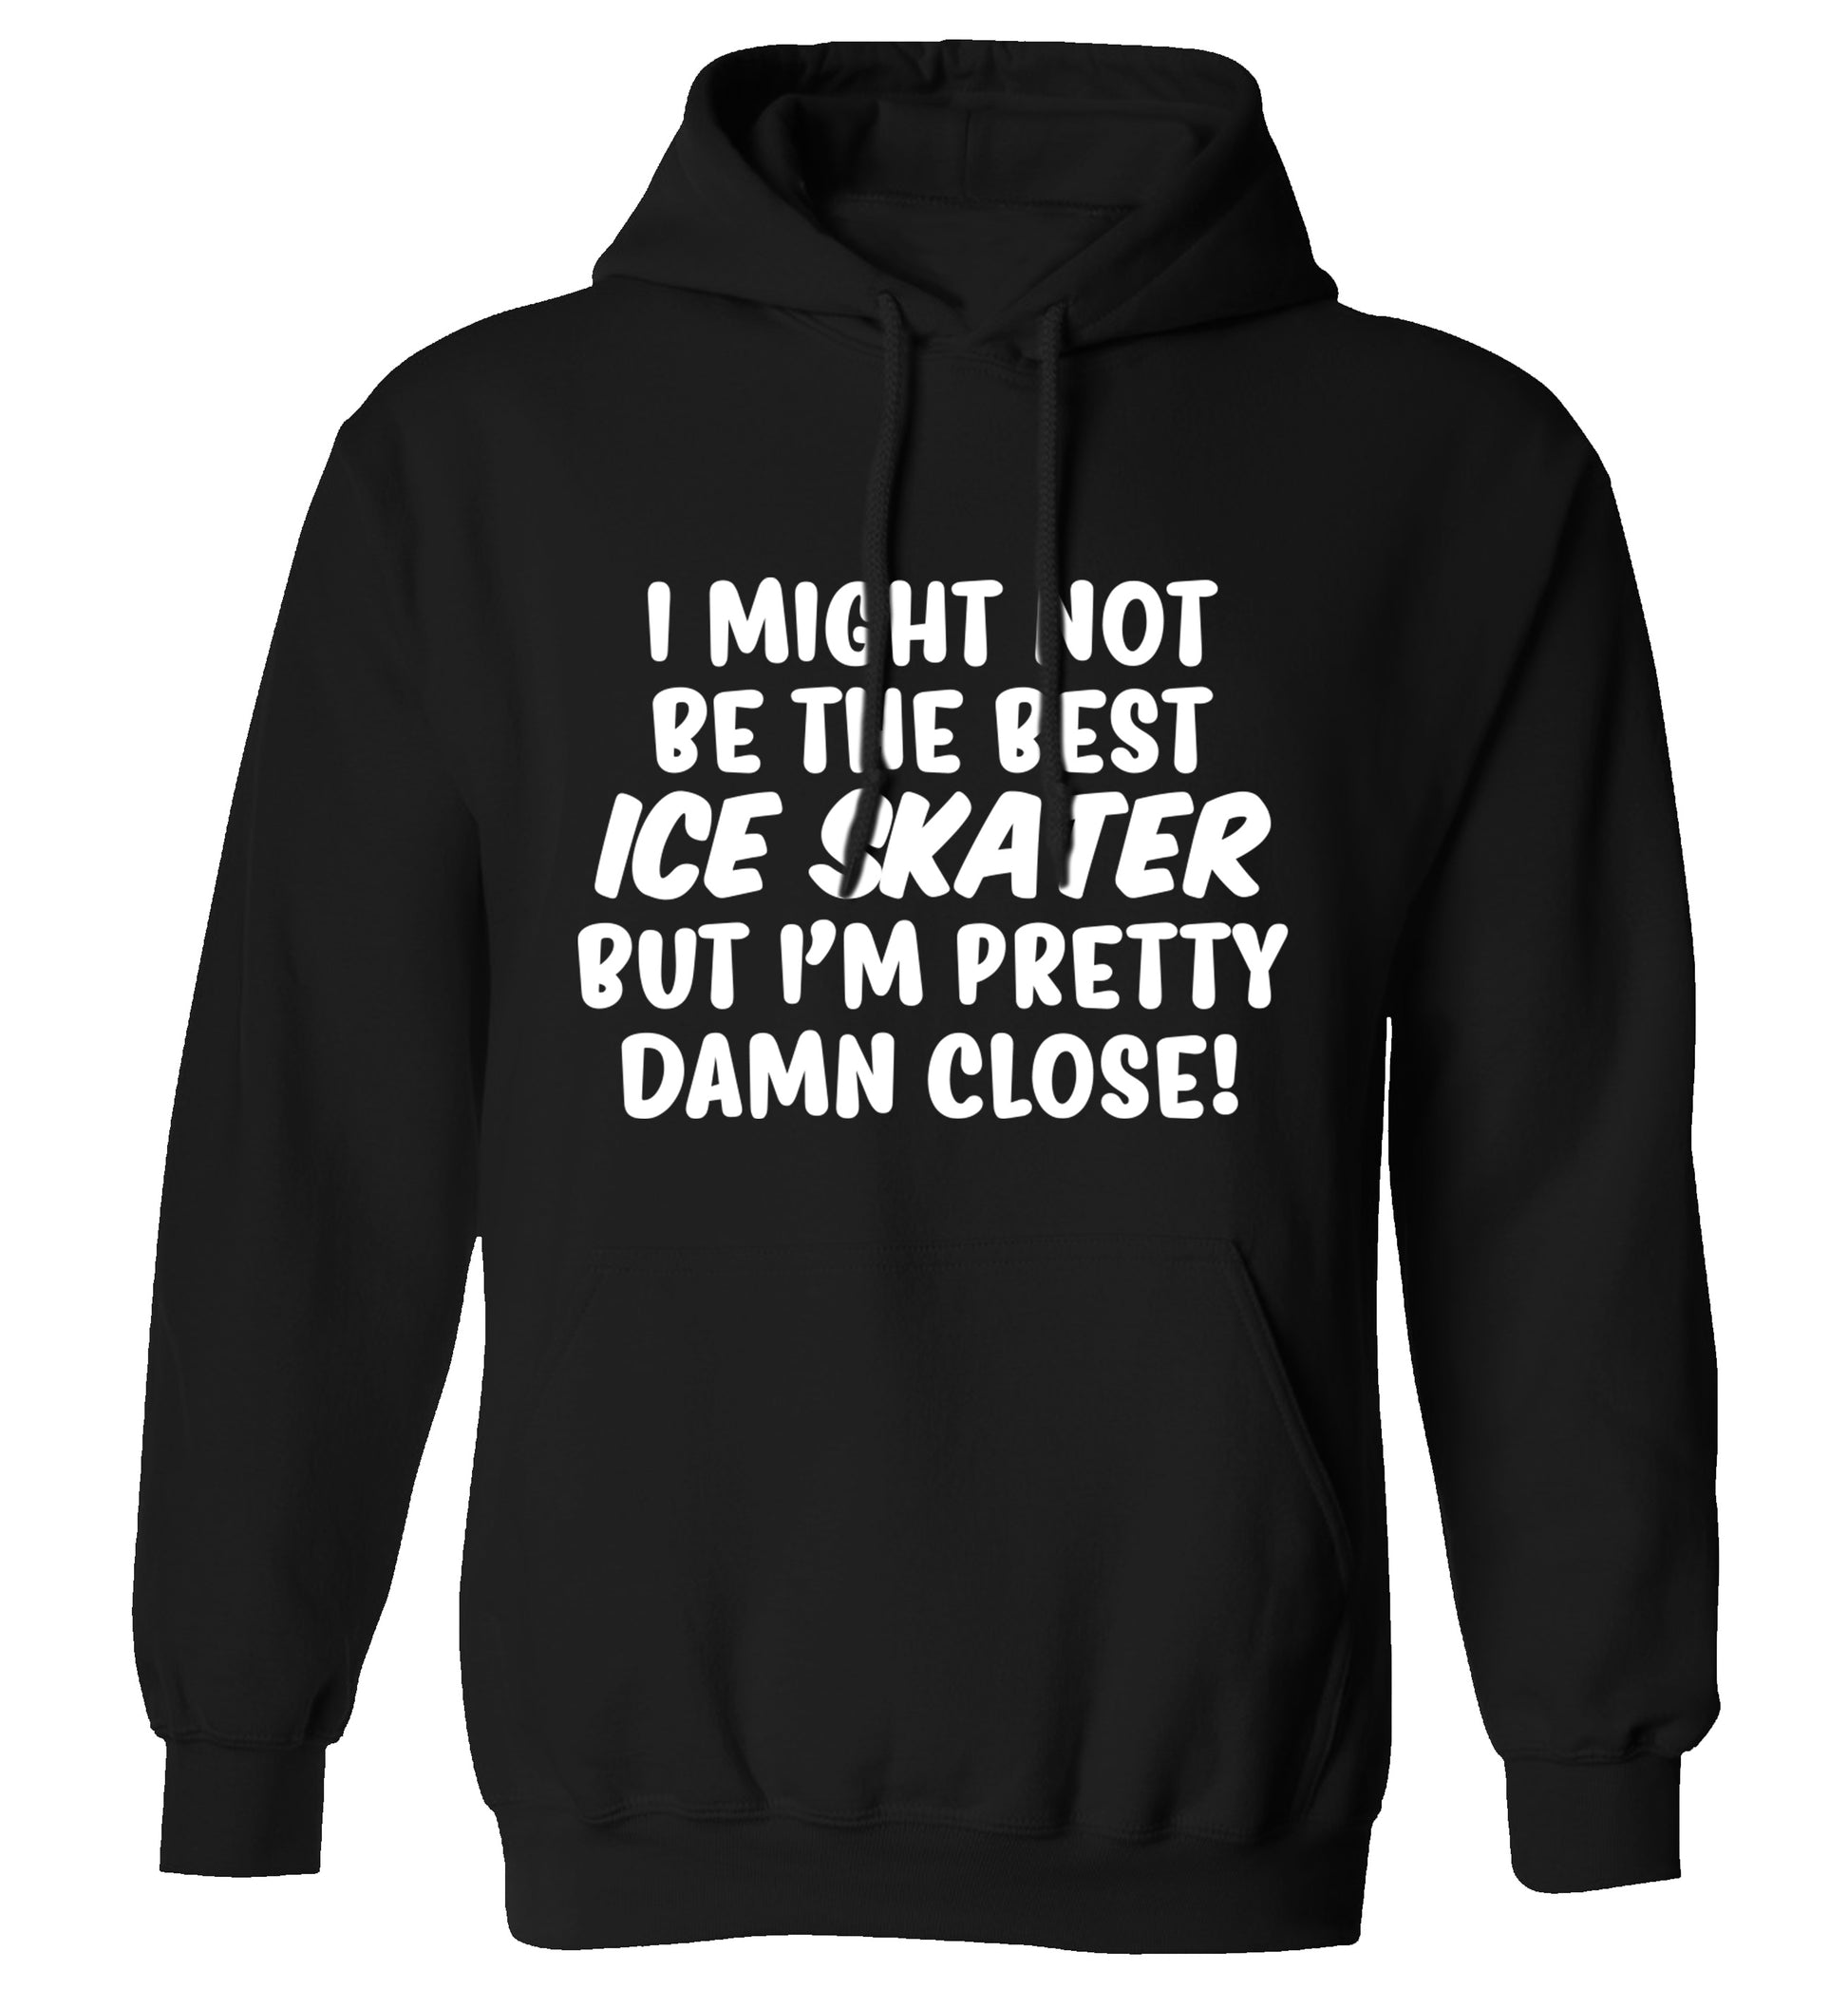 I might not be the best ice skater but I'm pretty damn close! adults unisexblack hoodie 2XL